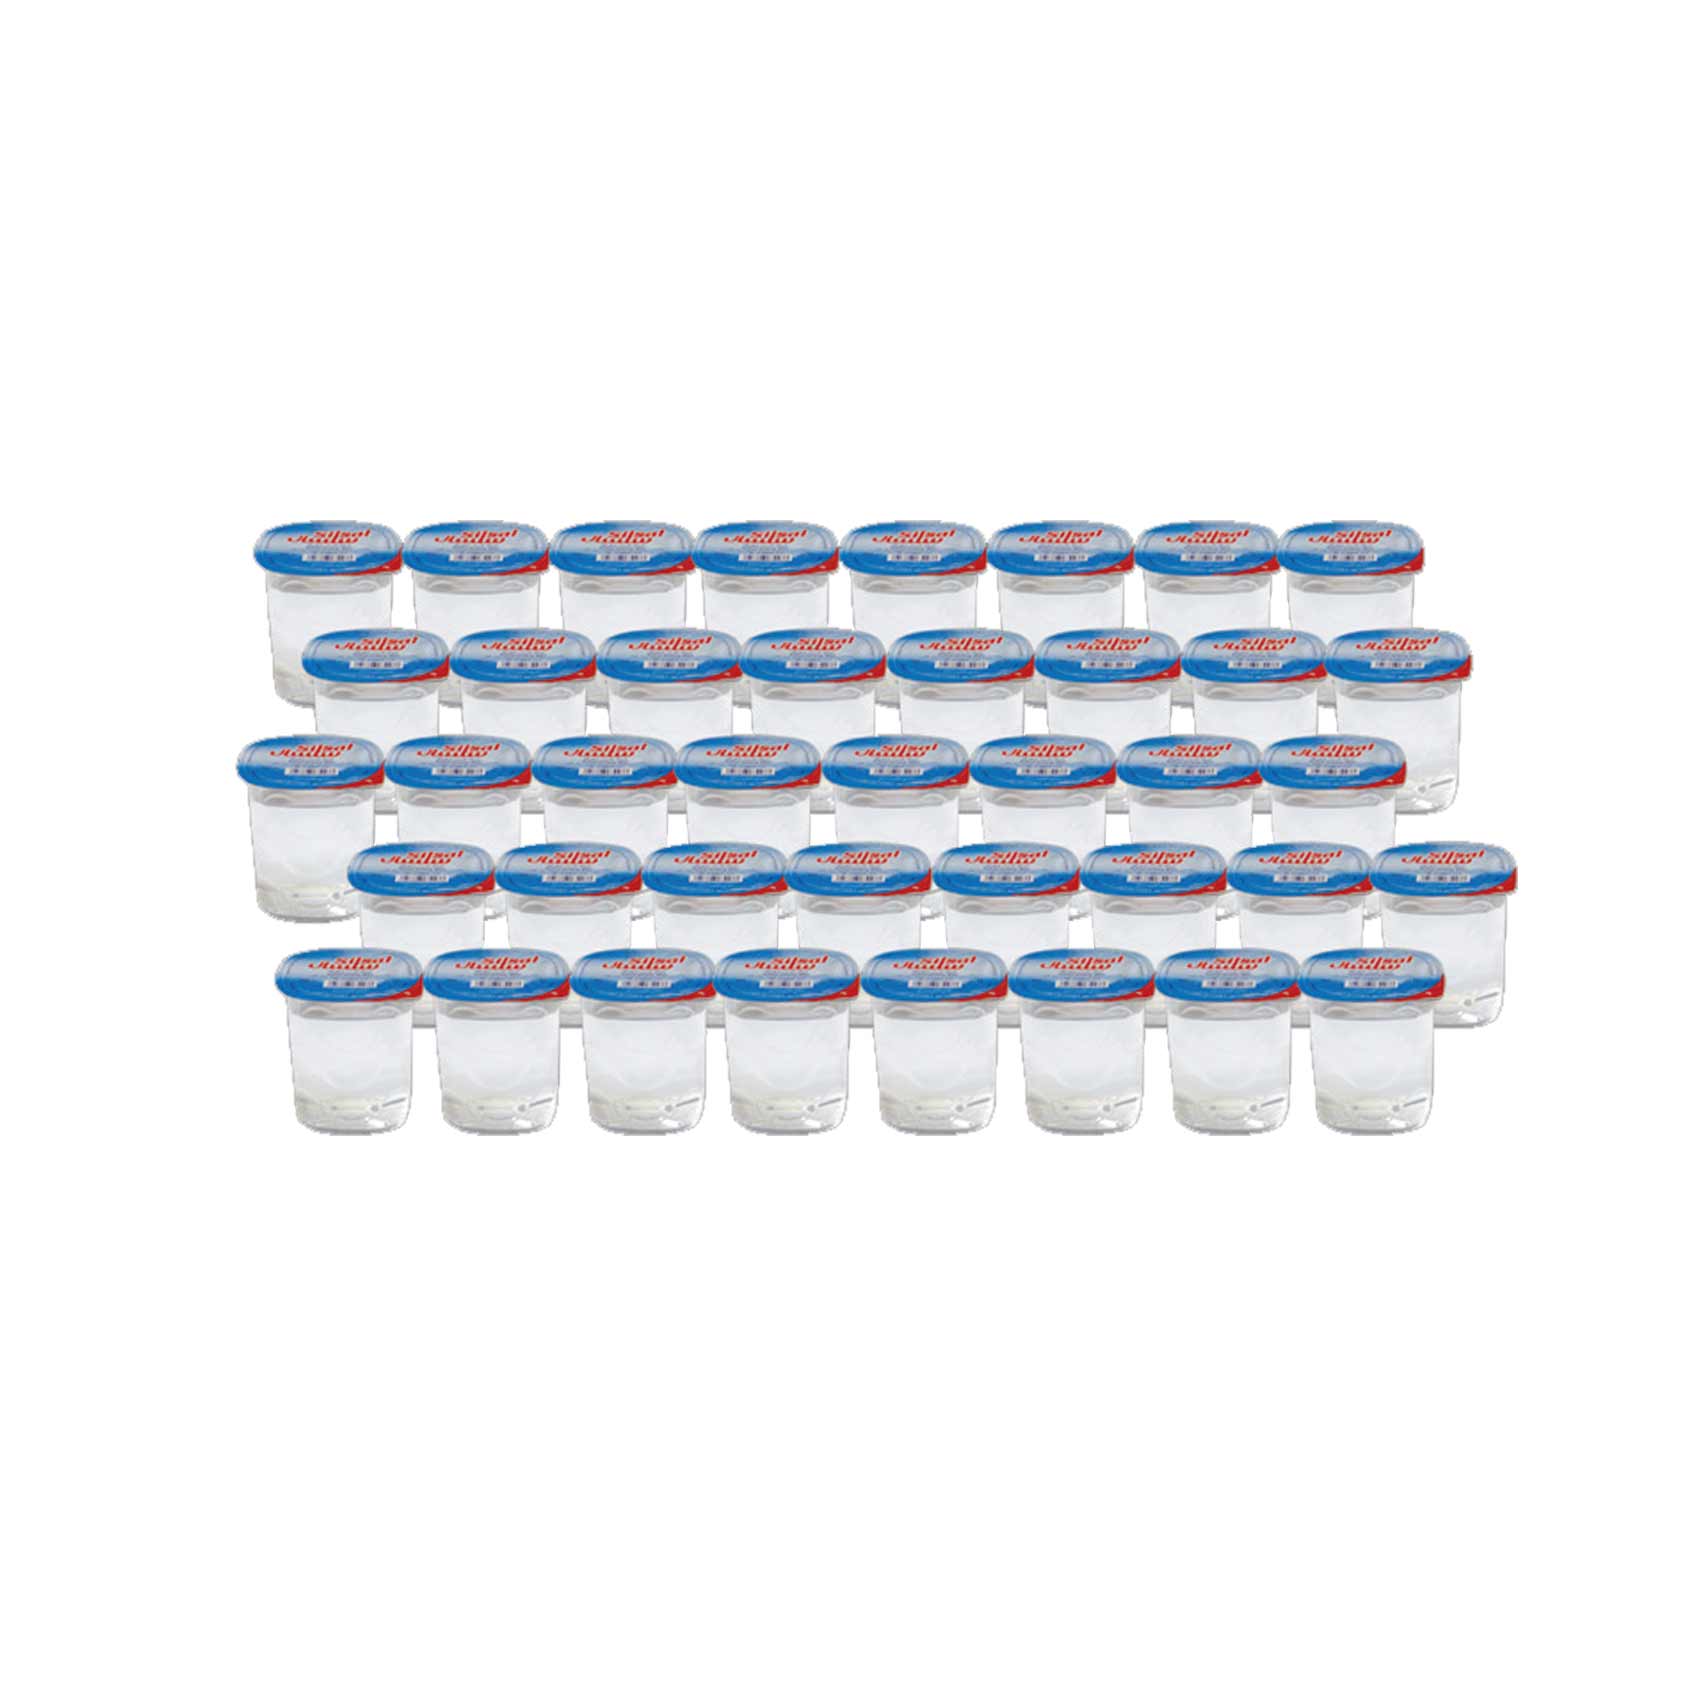 Silsal Water Cups 200 Ml 40 Pieces